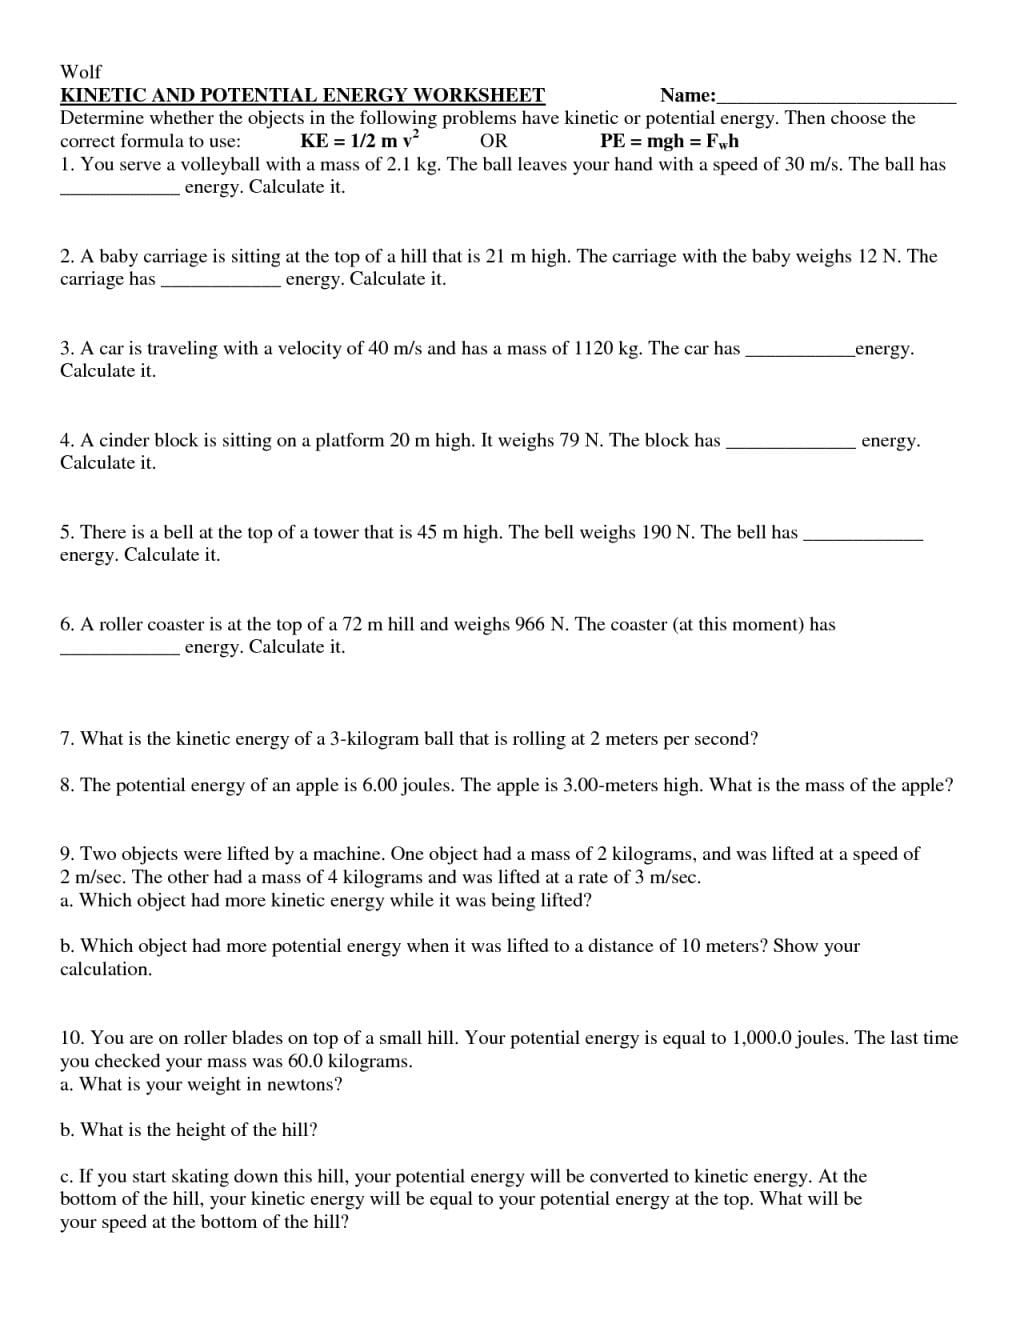 Kinetic And Potential Energy Problems Worksheet Answers